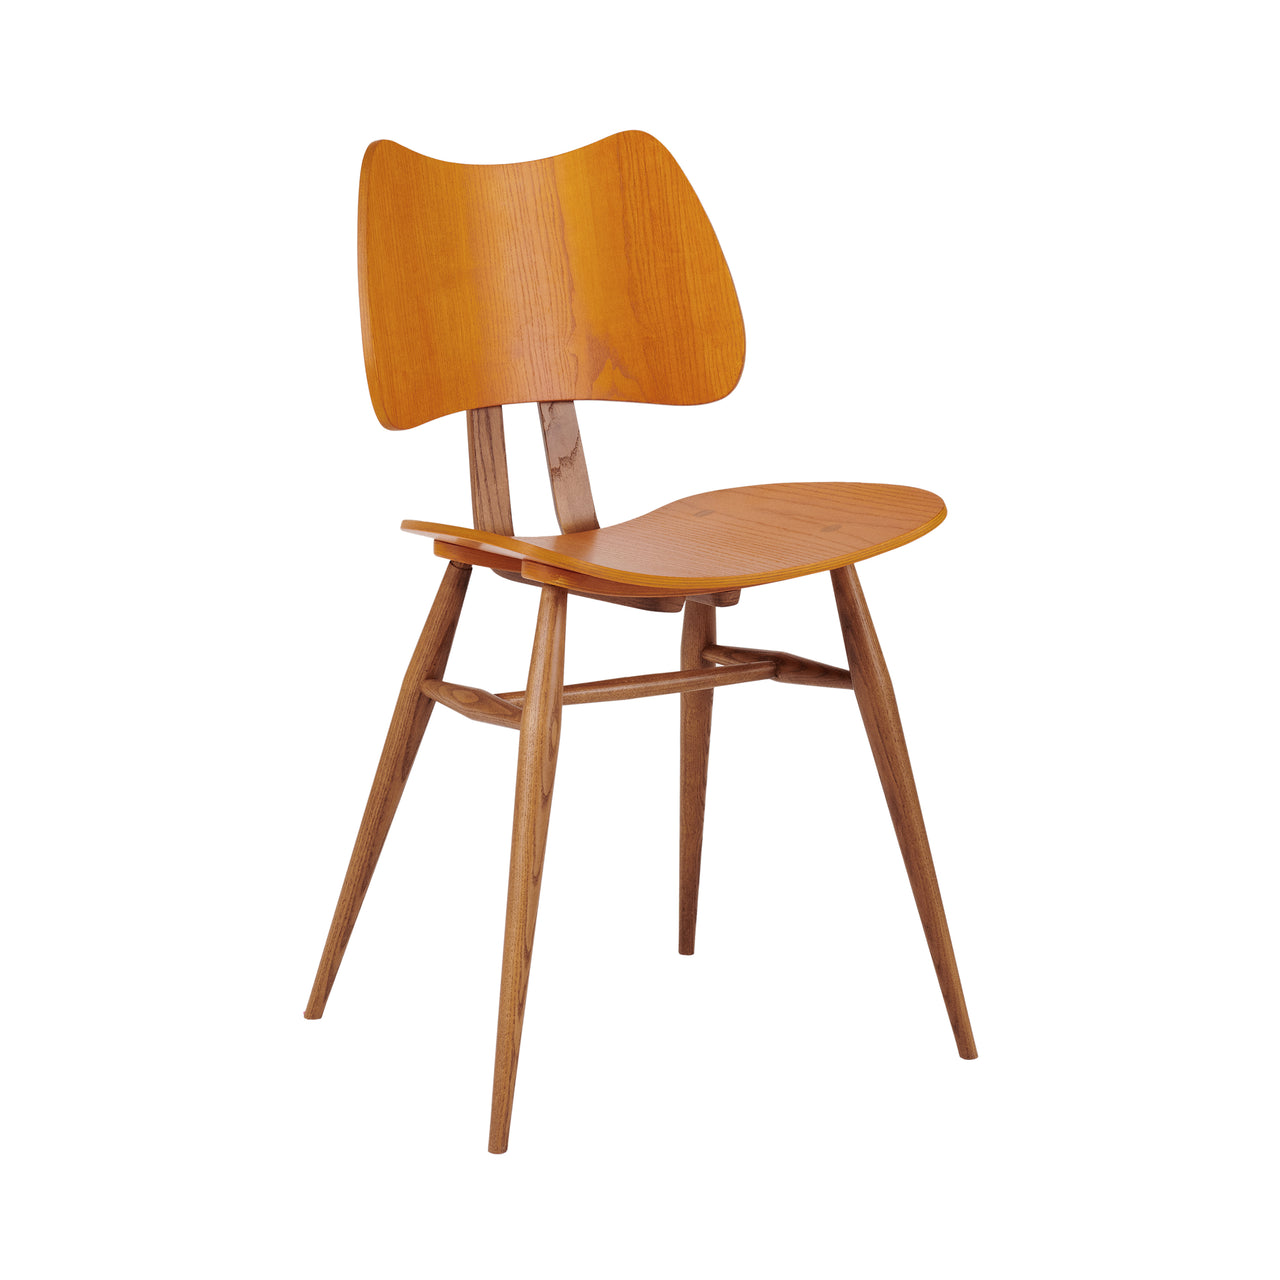 Originals Butterfly Chair: Stained Ochre + Stained Original Ash